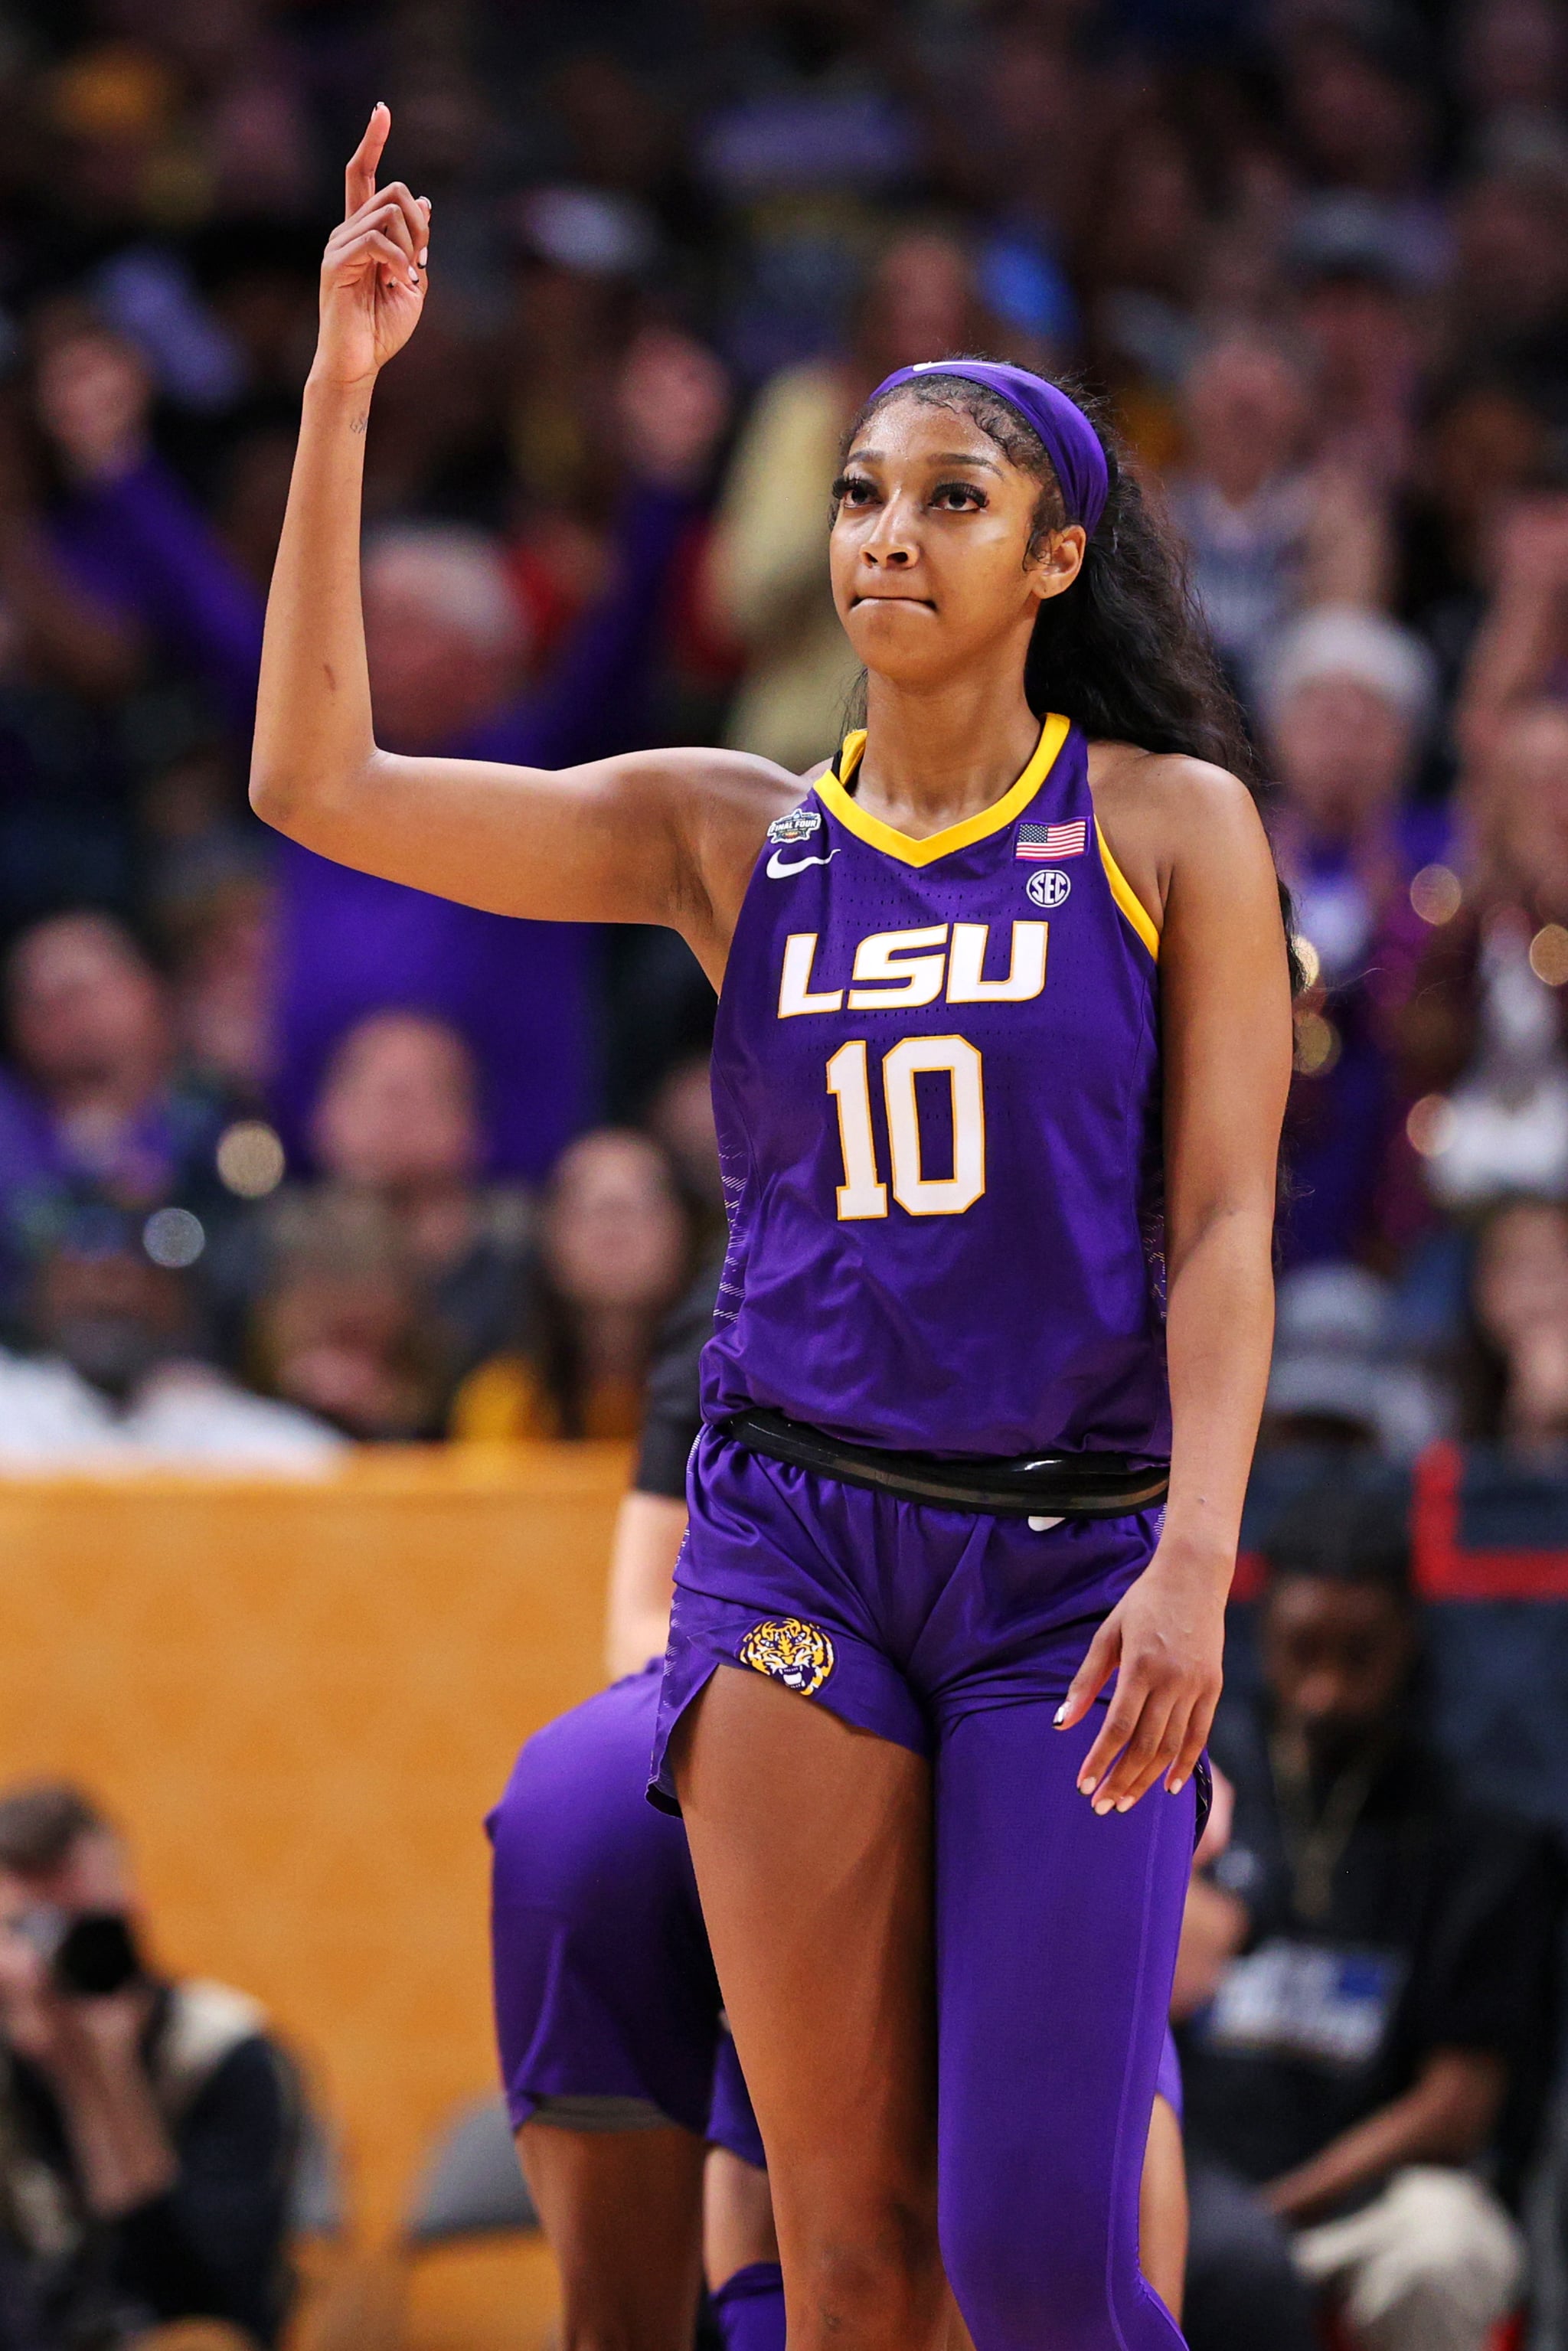 DALLAS, TEXAS - MARCH 31: Angel Reese #10 of the LSU Lady Tigers reacts after the 79-72 victory over the Virginia Tech Hokies during the 2023 NCAA Women's Basketball Tournament Final Four semifinal game at American Airlines Center on March 31, 2023 in Dallas, Texas. (Photo by Maddie Meyer/Getty Images)